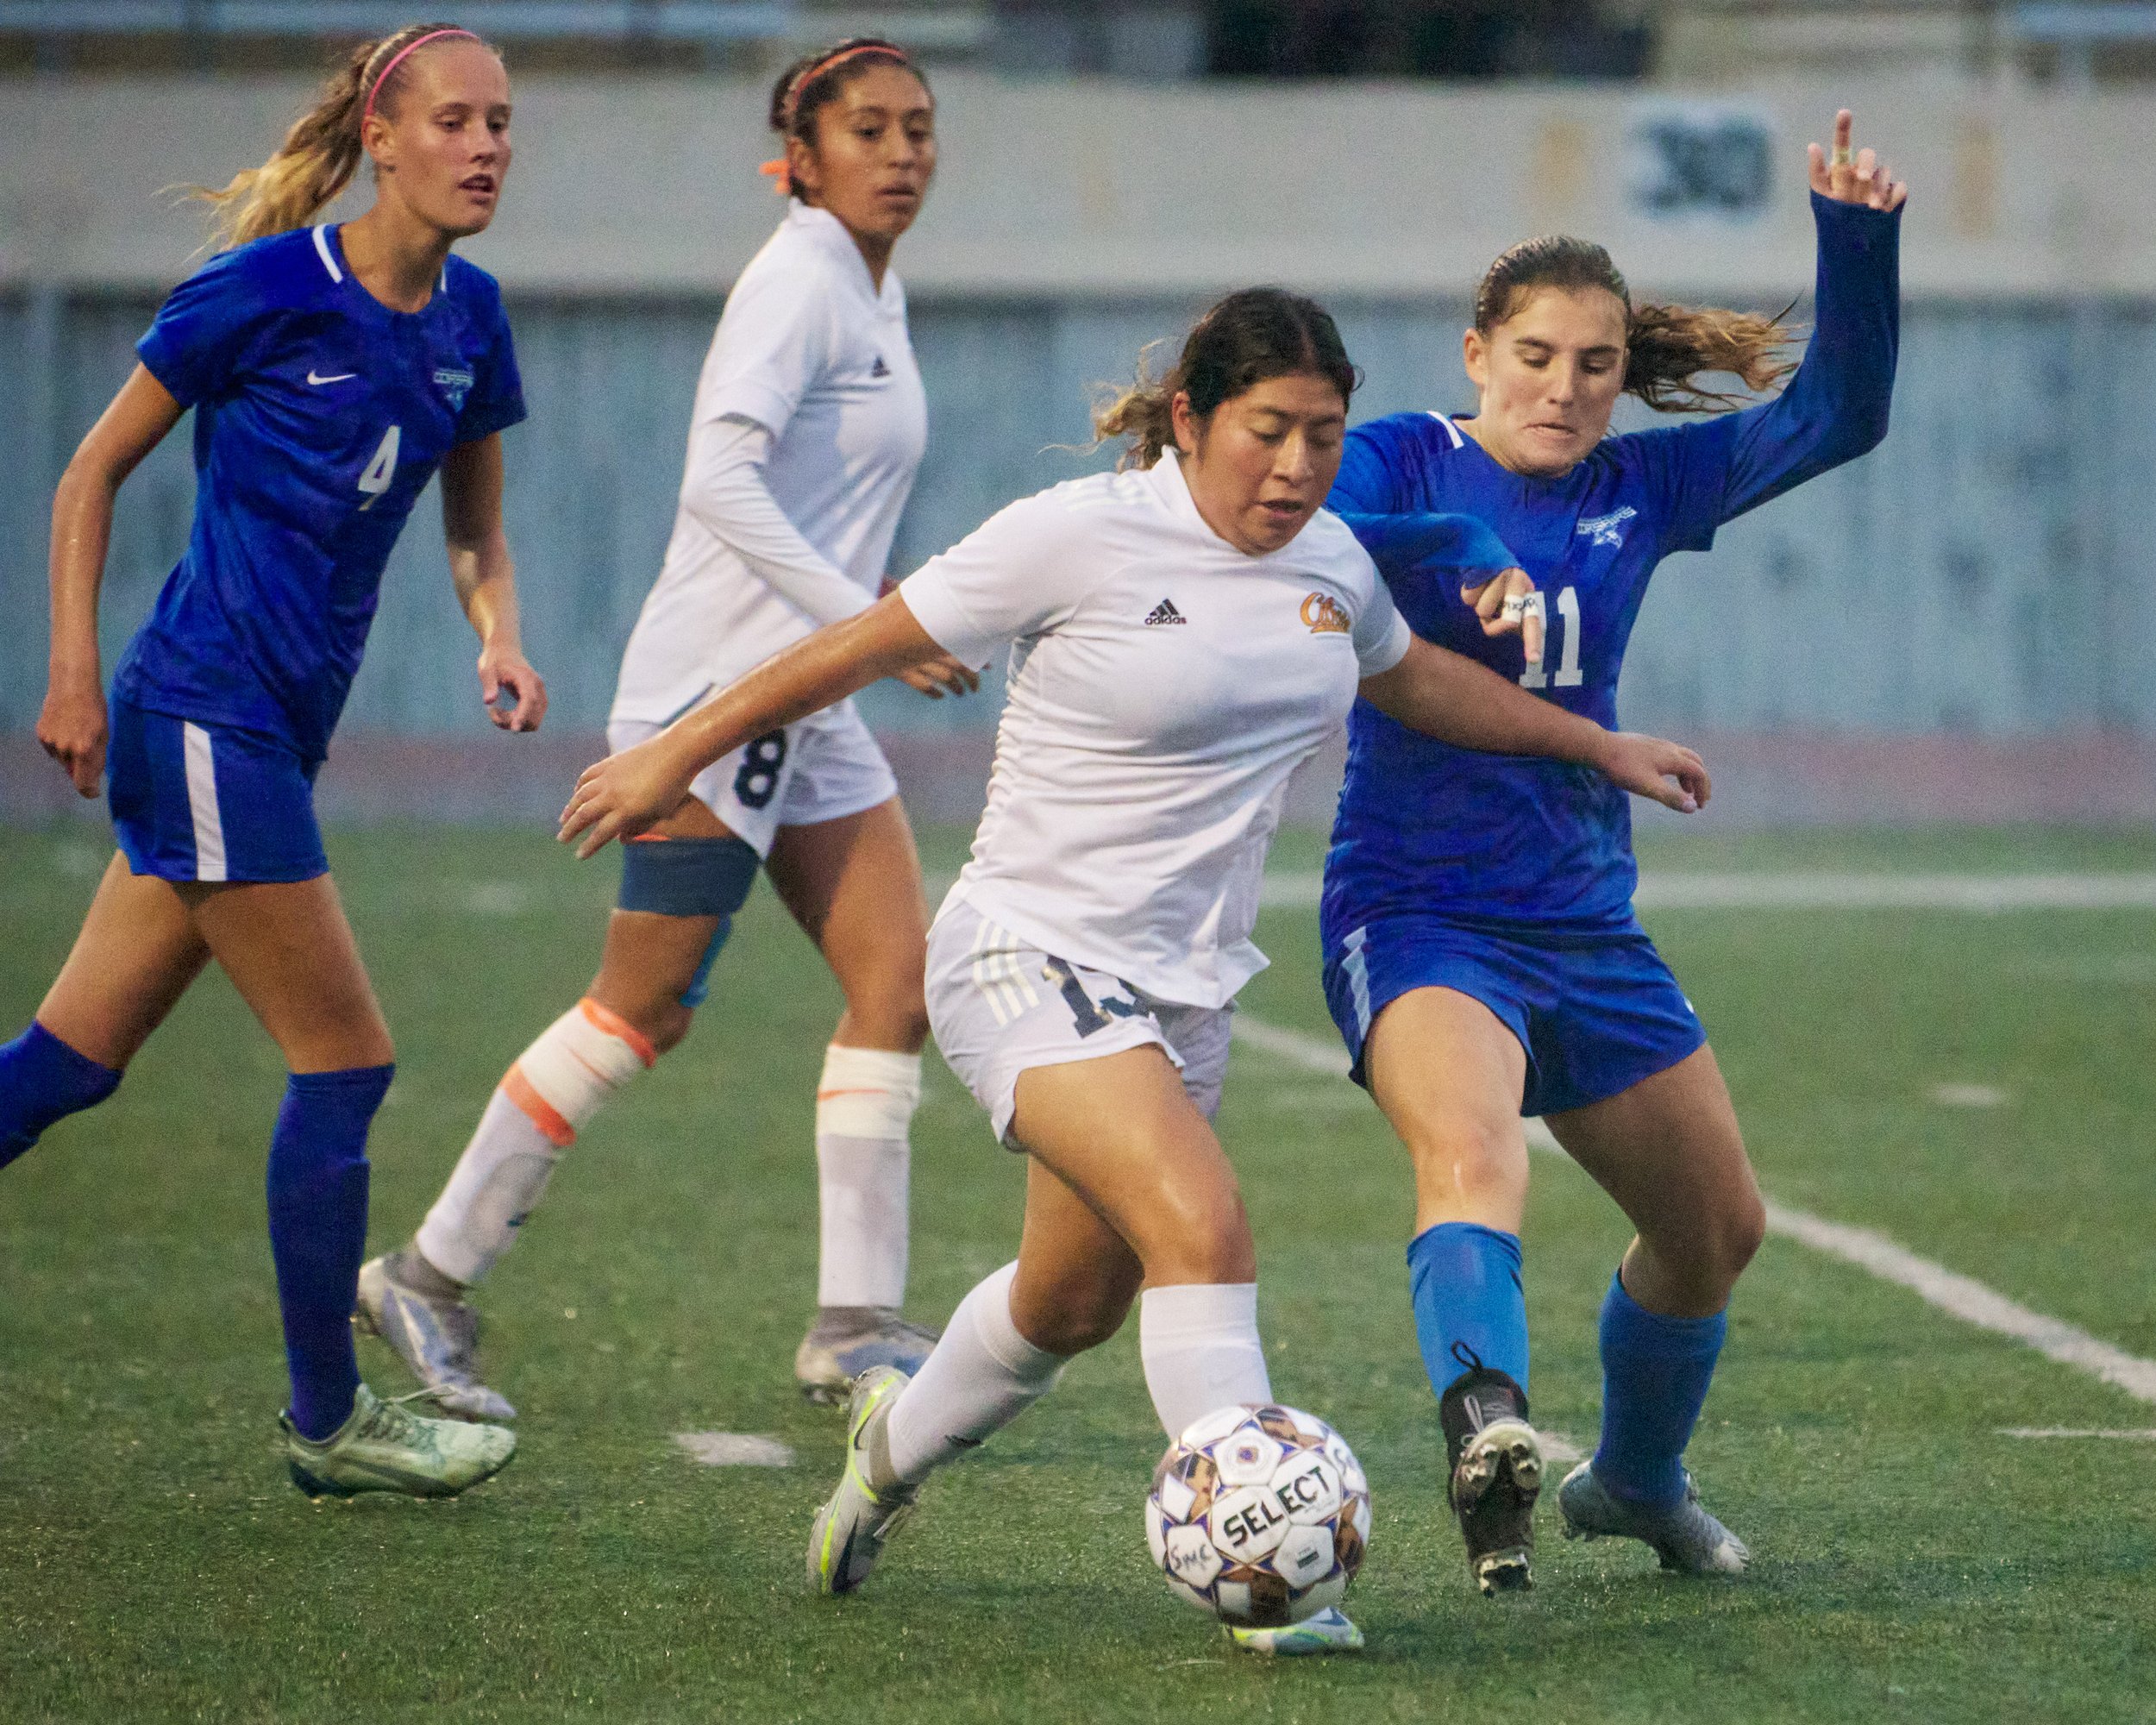  Santa Monica College Corsairs' Emma Rierstam (left) and Eden Bechnainou (right), and Citrus College Owls' Kaylee Sanchez (center left) and Sandra Balderas (center right) during the women's soccer match on Tuesday, Nov. 8, 2022, at Corsair Field in S